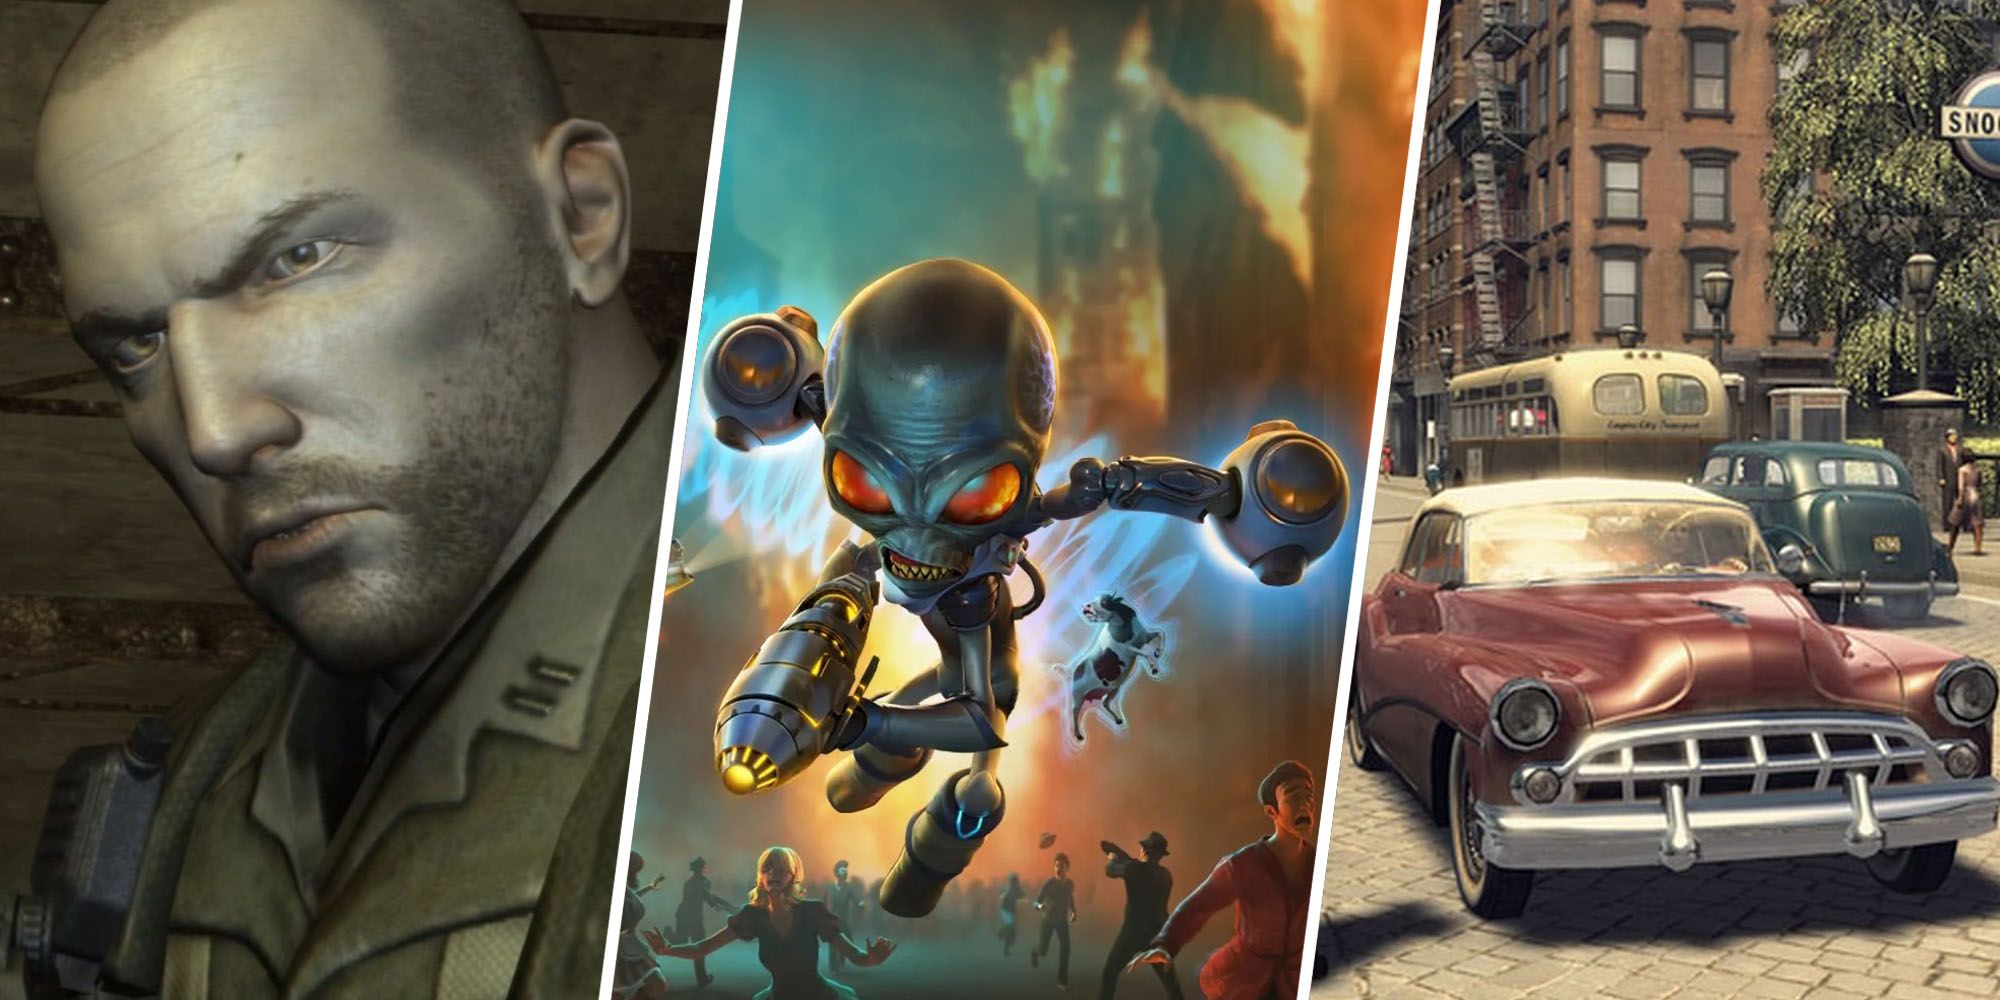 Resistance, Destroy All Humans, and Mafia II feature image